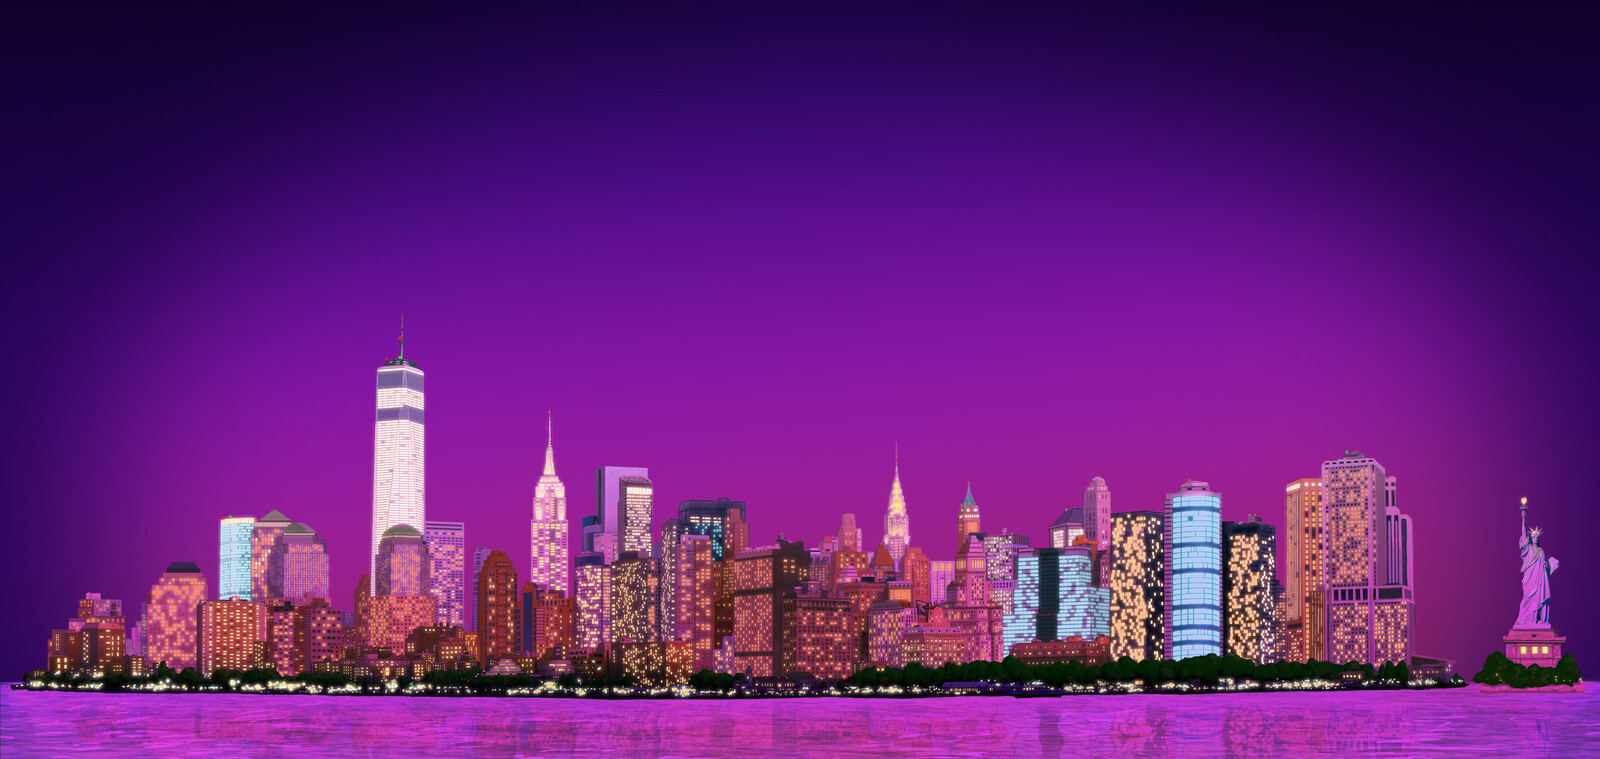 Scrolling background of New York City, night version